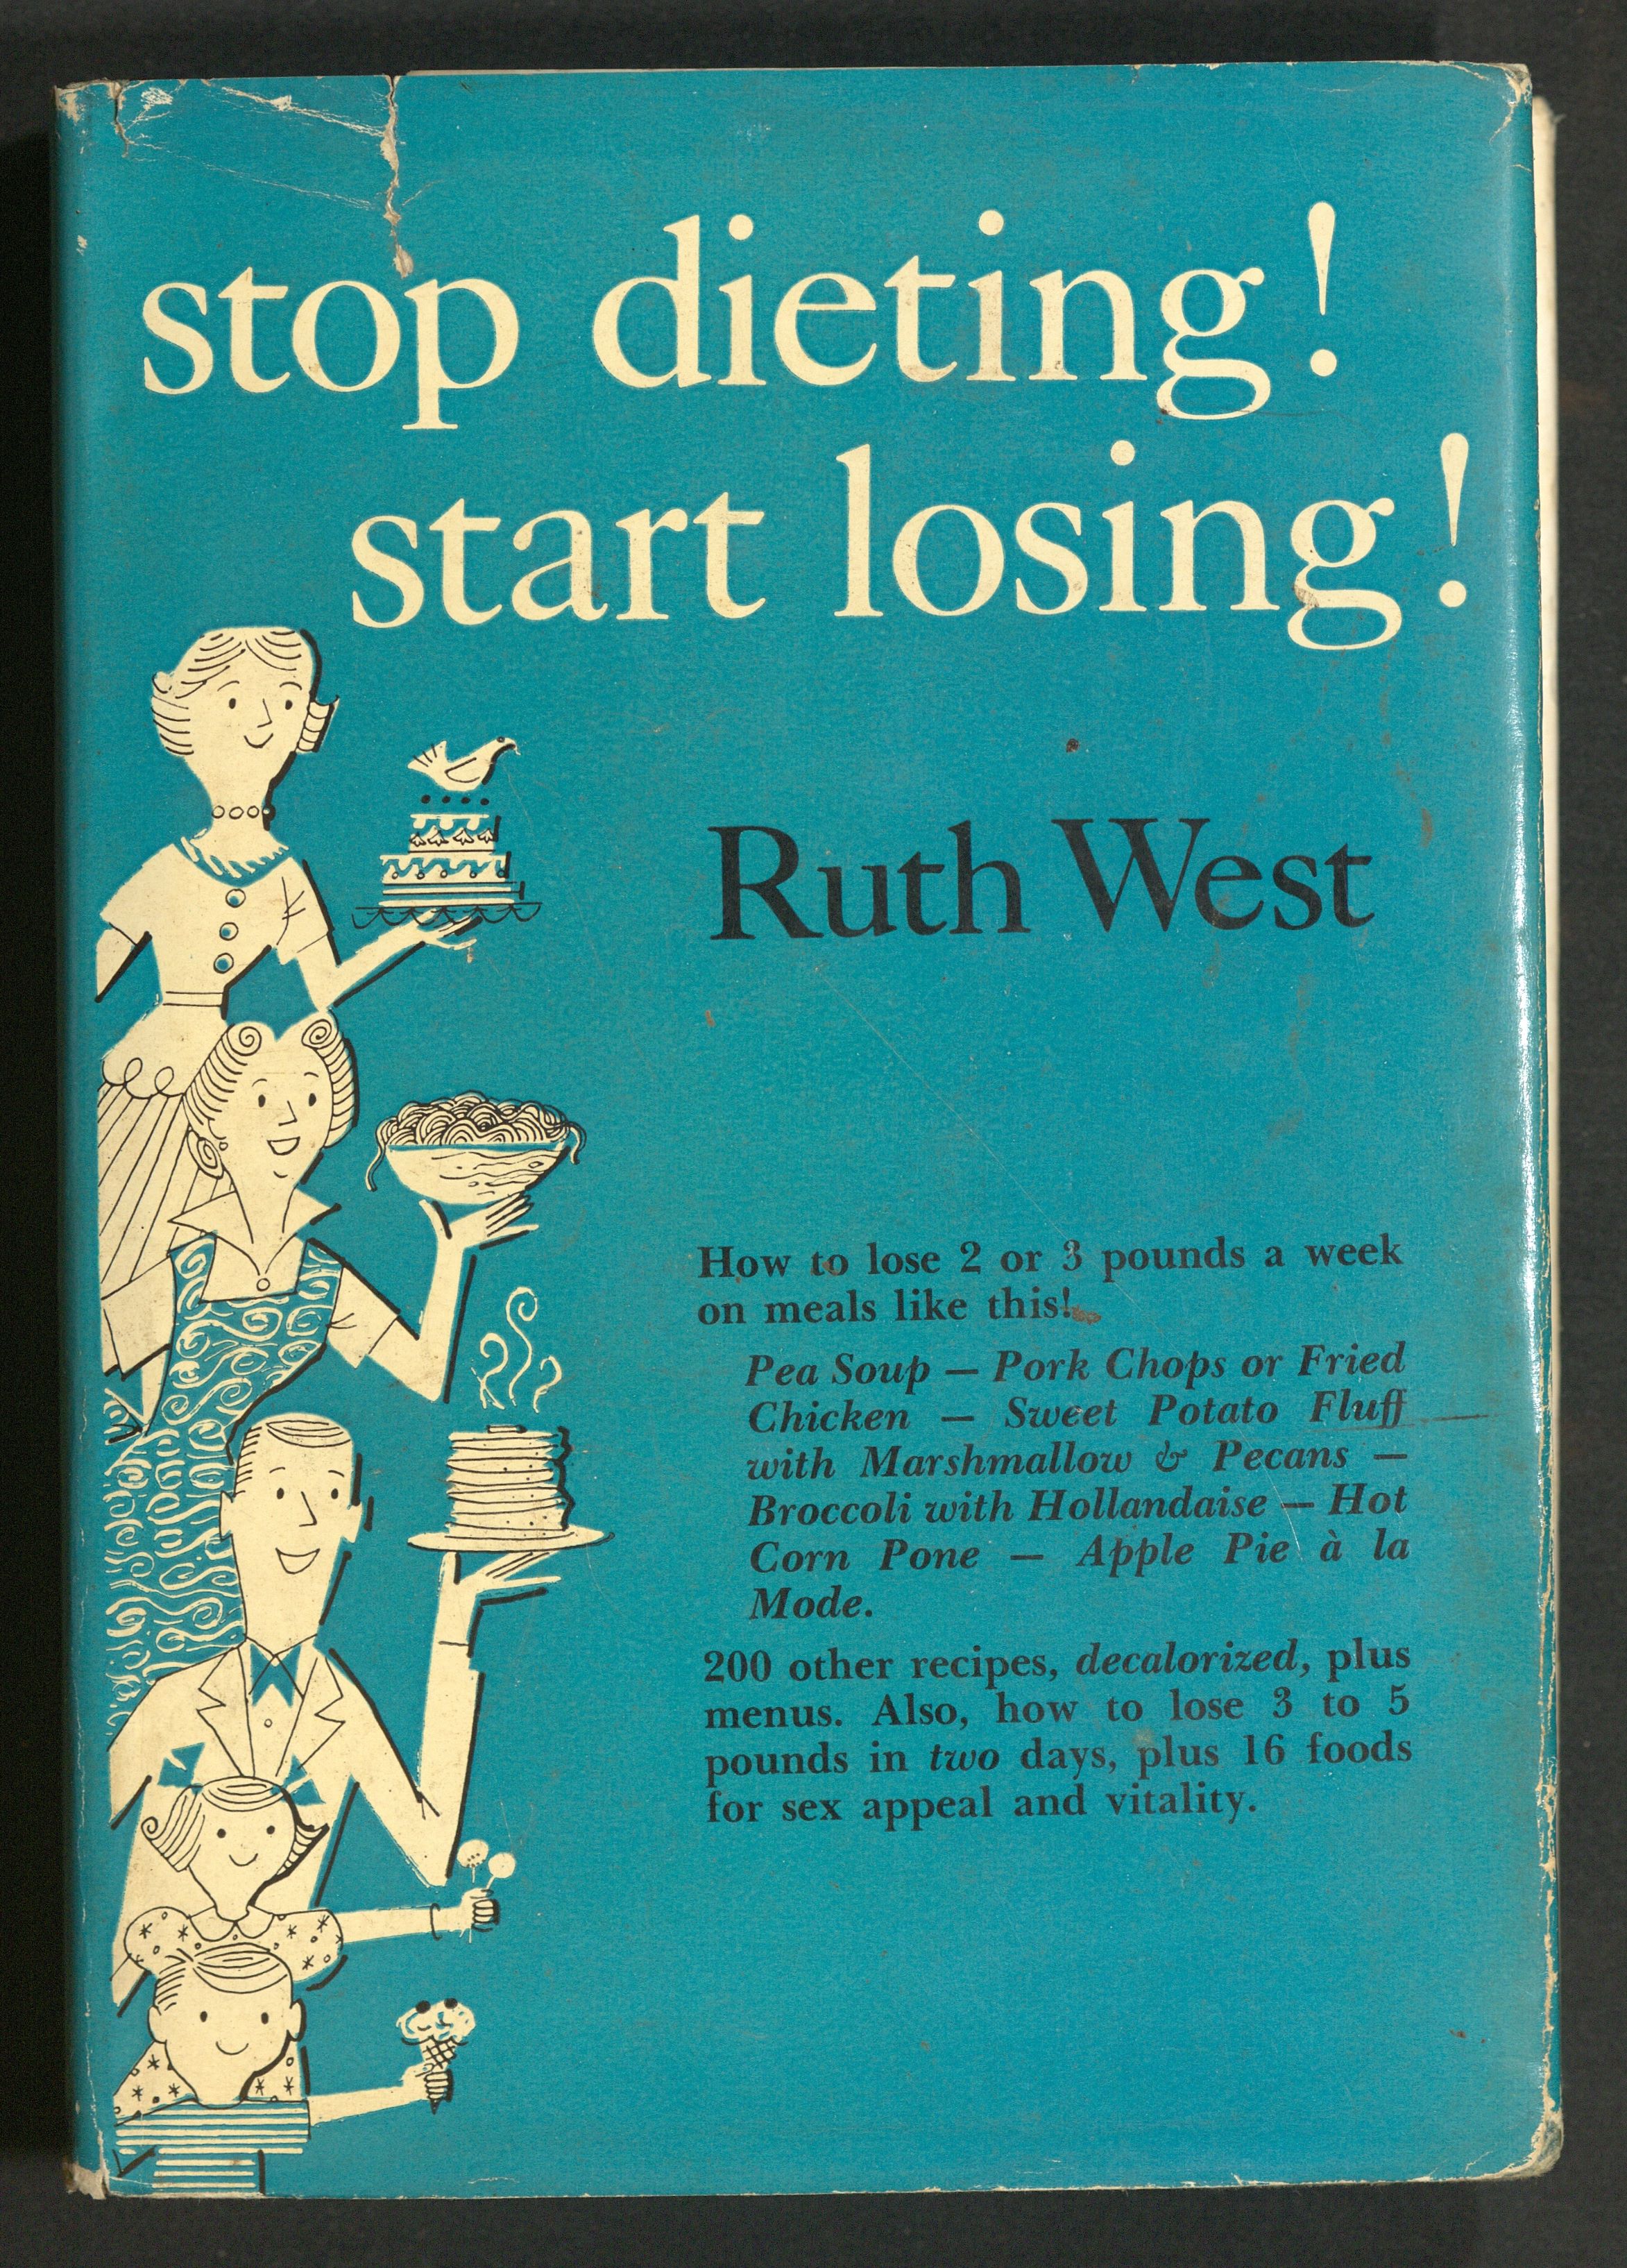 Cover of Stop Dieting! Start Losing! Blue cover with white and black drawn illustrations of 2 women, 1 man, and 2 children holding up various kinds of food not typically associated with diets, like cake and ice cream cones. 